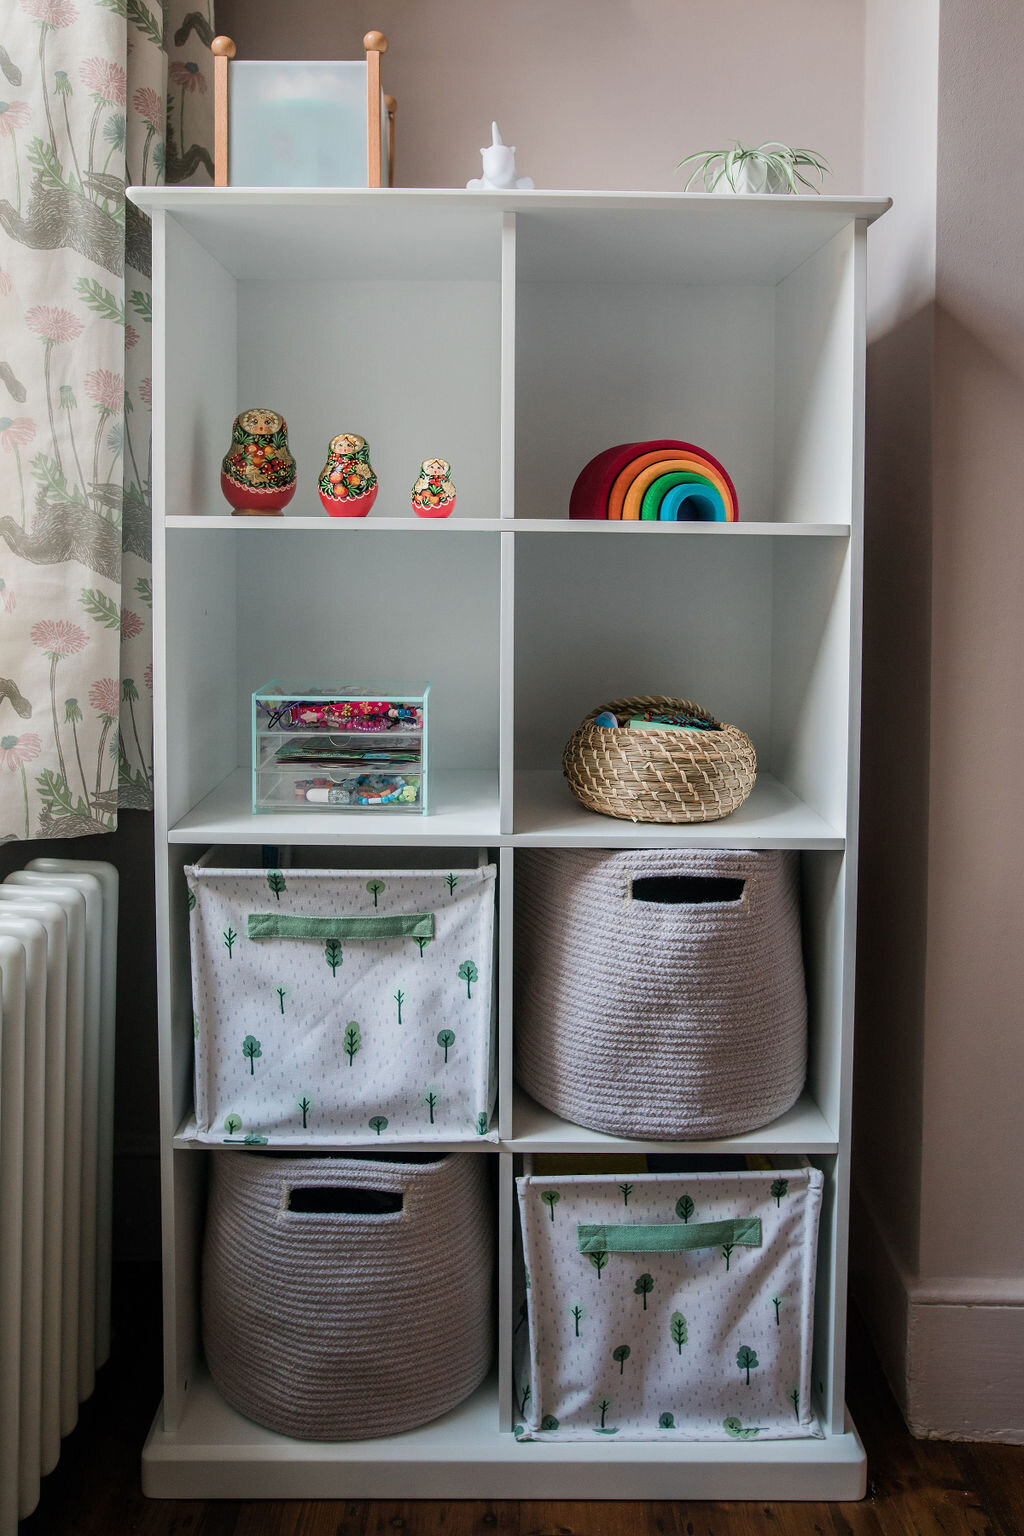 White cube shelving unit with ornaments and insert bins